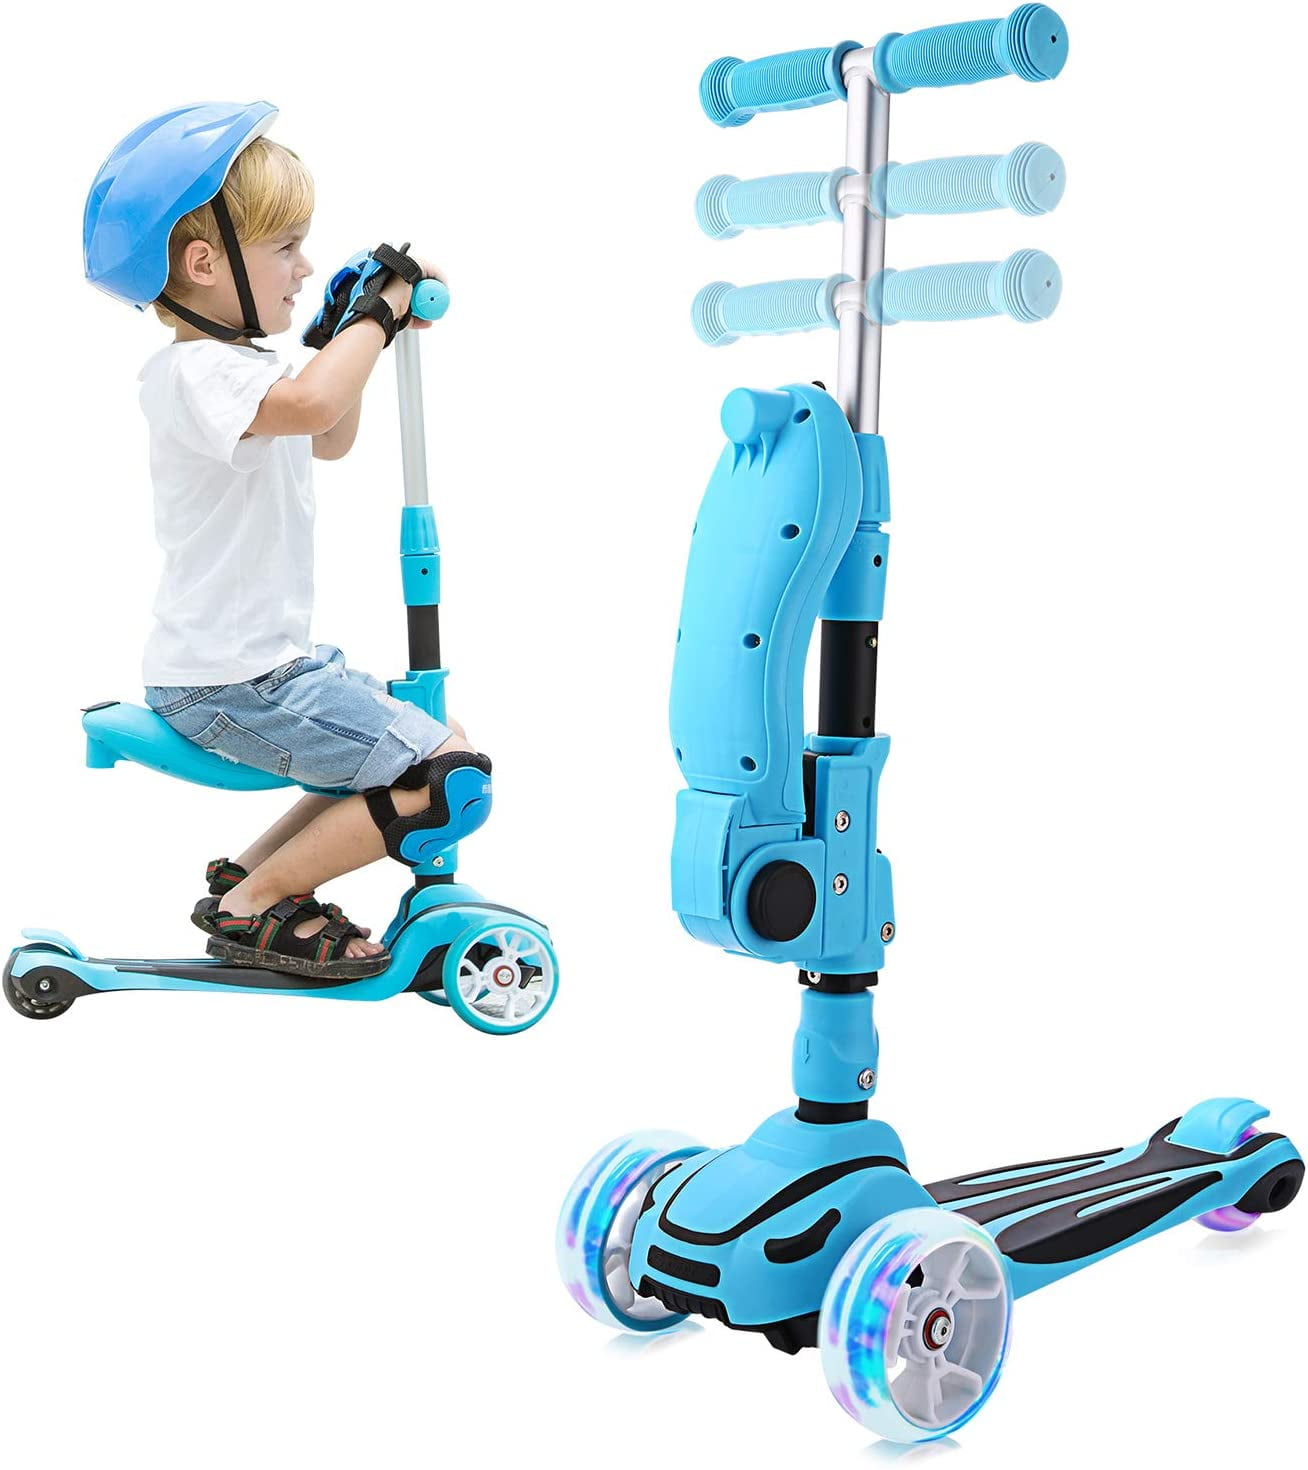 Y100 2-in-1 Scooter for Kids with Folding Removable Seat ZERO ASSEMBLY Fun Outdoor Toys for Kids Fitness 3 LED Flashing Wheels Adjustable Height Kick Scooter for Toddlers Girls /& Boys 2-12 Years-Old